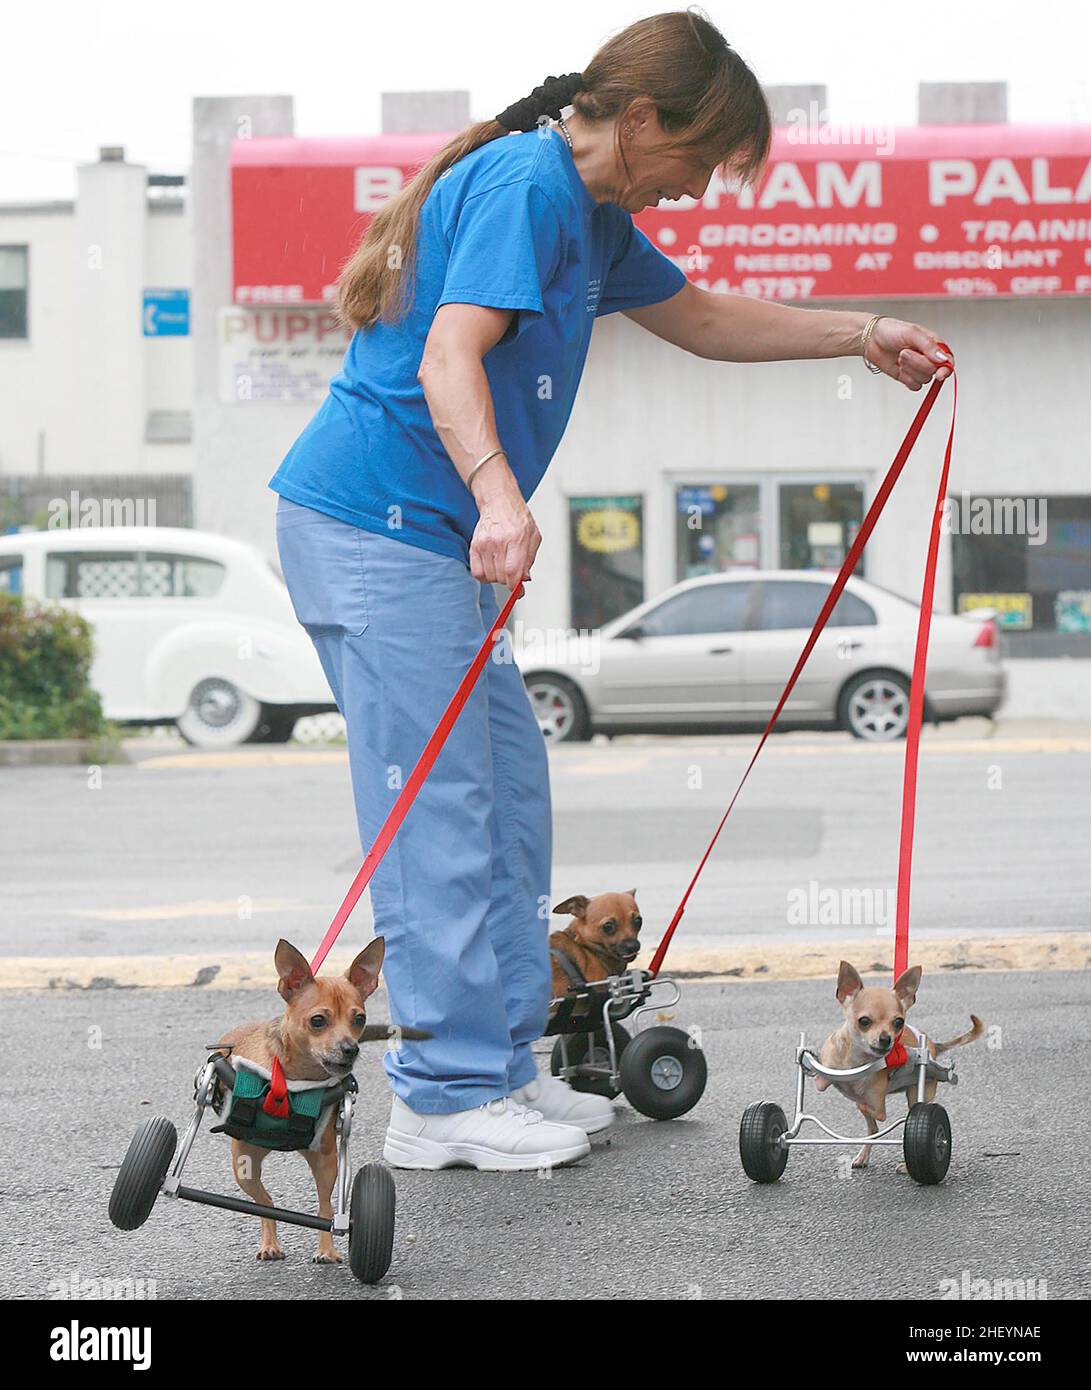 OWNER DONNA IMHOF TAKING THREE OF THE WORLDS FIRST FOUR CHIHUAHUA PUPS WHO WERE BORN WITHOUT FRONT LEGS, ON SPECIALLY DESIGNED WHEELS. GOING FOR A WALK  .  THE WORLD'S FIRST FOUR CHIHUAHUA DOGS BORN WITHOUT FRONT LEGS HAVE LEARNT TO USE THEIR SPECIALLY ADAPTED WHEELS TO GET AROUND. NEW YORK, USA.  PICTURE: GARY ROBERTS Stock Photo